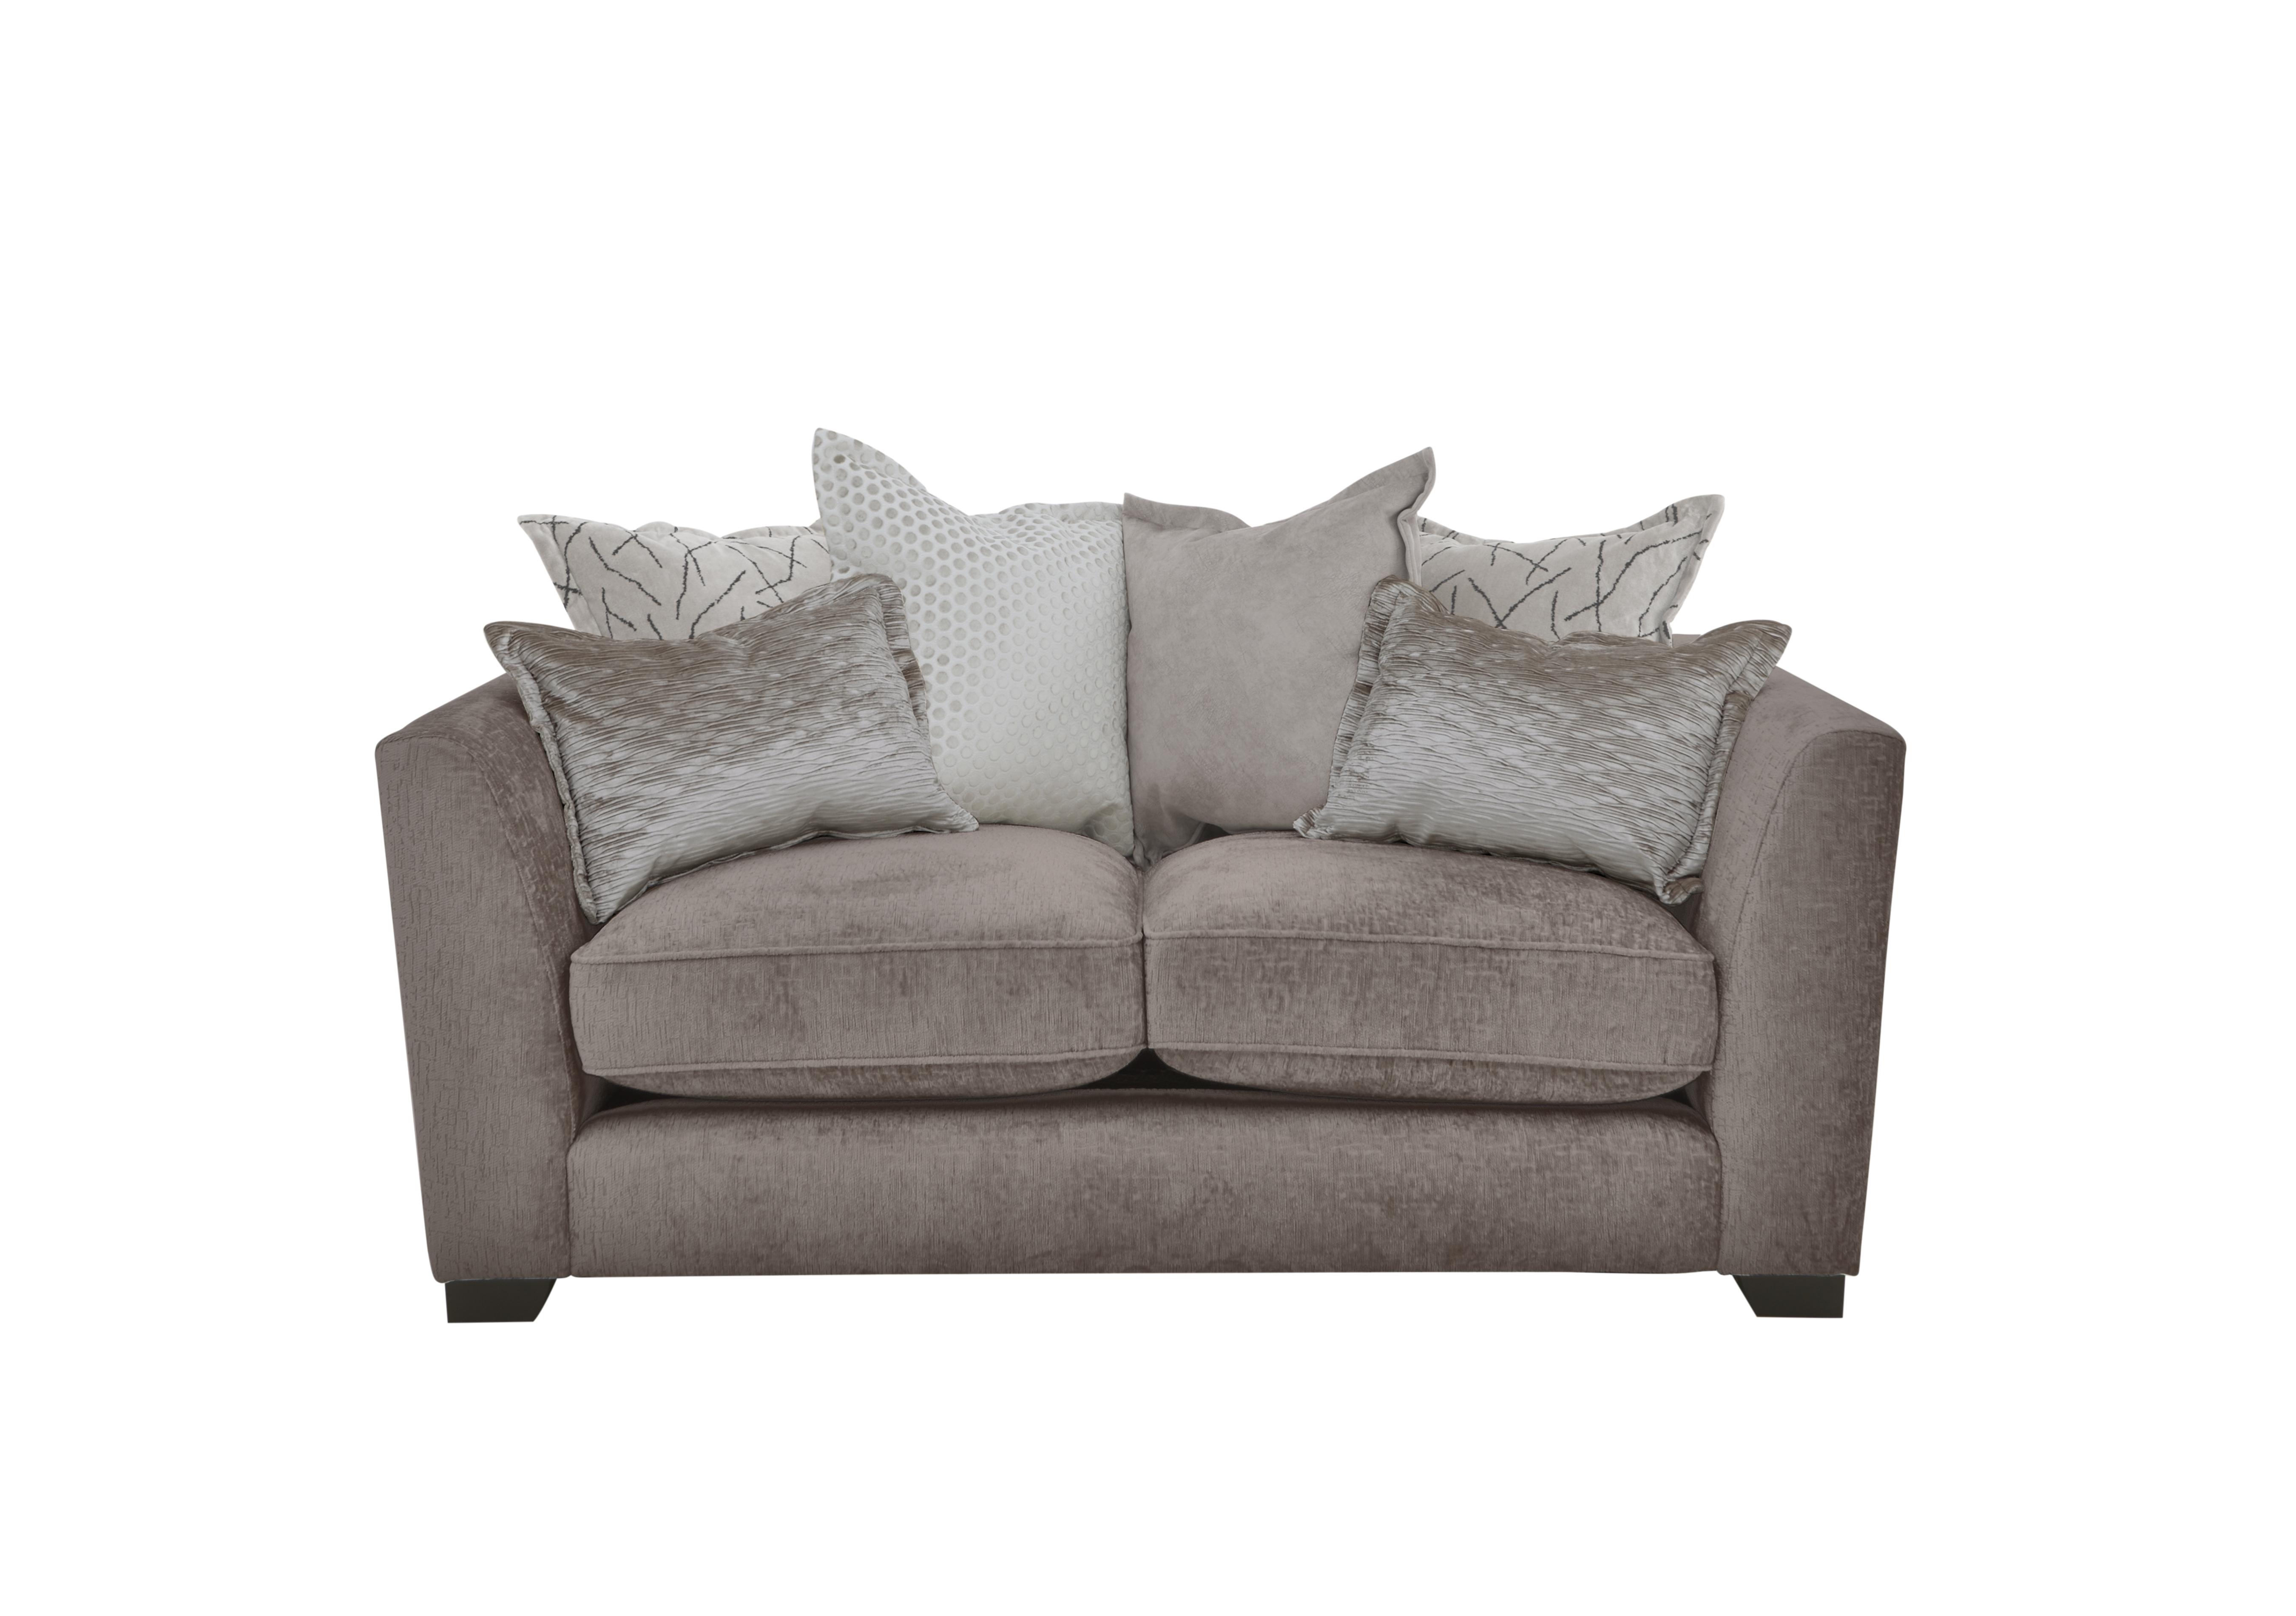 Boutique Lavish Fabric 2 Seater Scatter Back Sofa in Alexandra Grey on Furniture Village